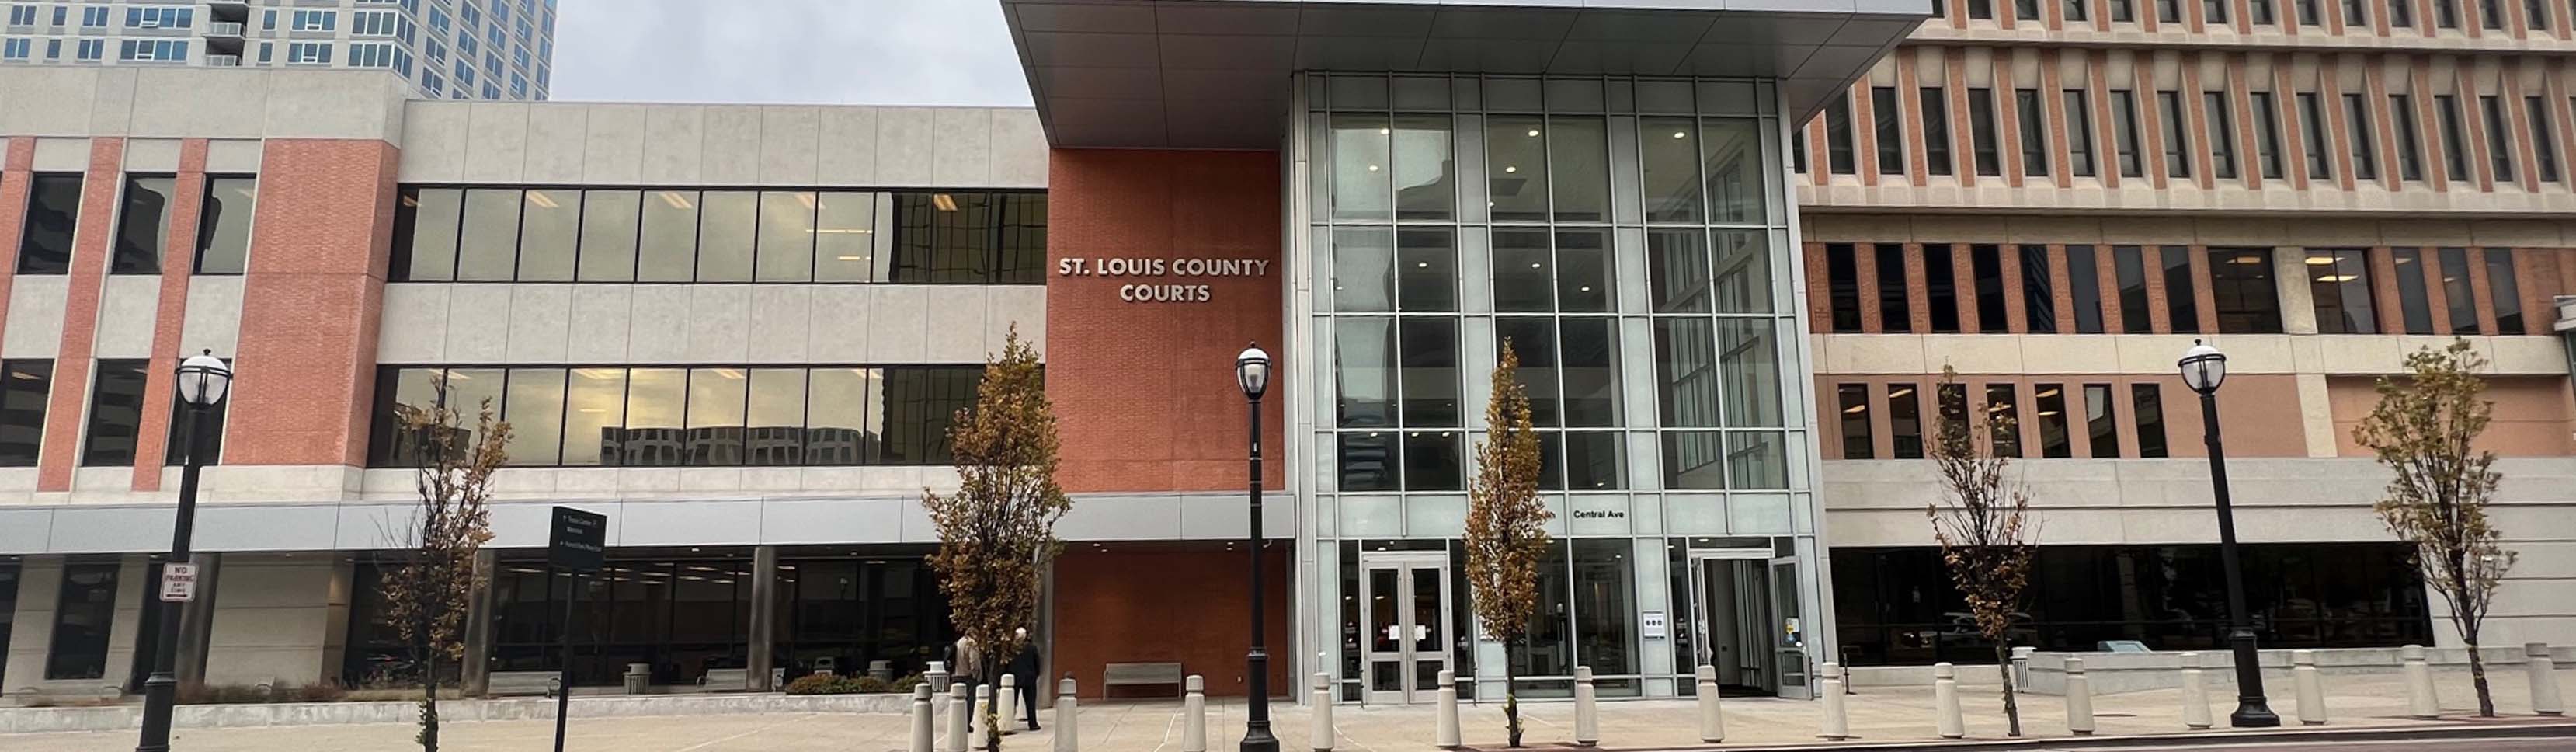 Entry of St. Louis County Courts